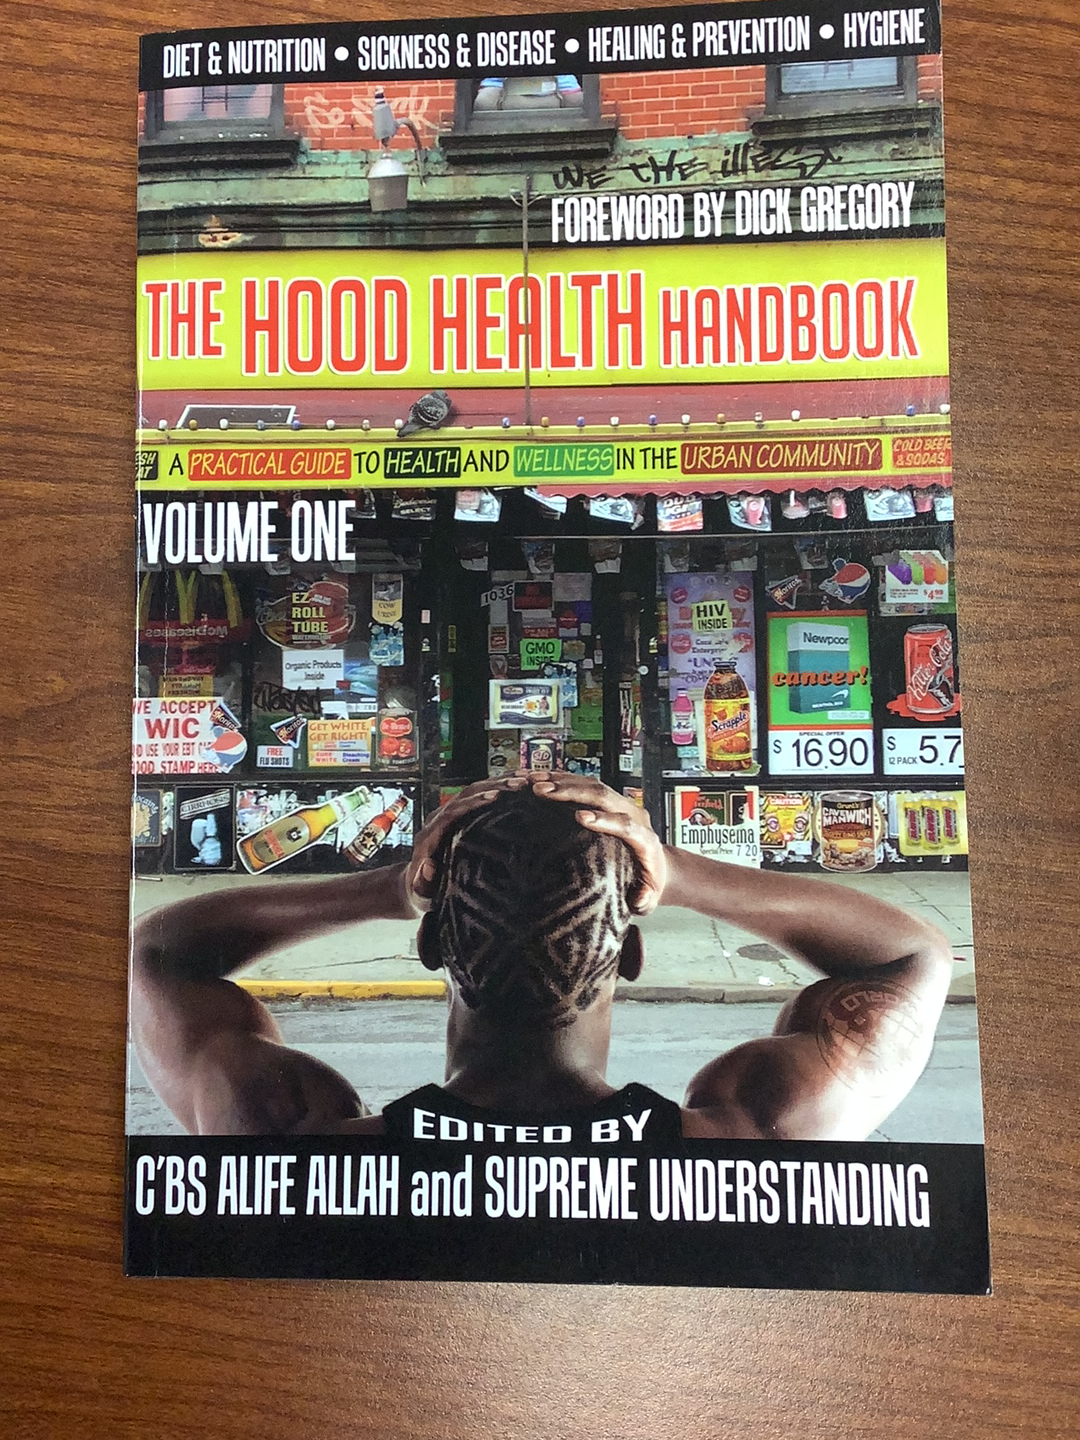 The Hood Health Handbook Volume 1: A Practical Guide to Health and Wellness in the Urban Community(Paperback)